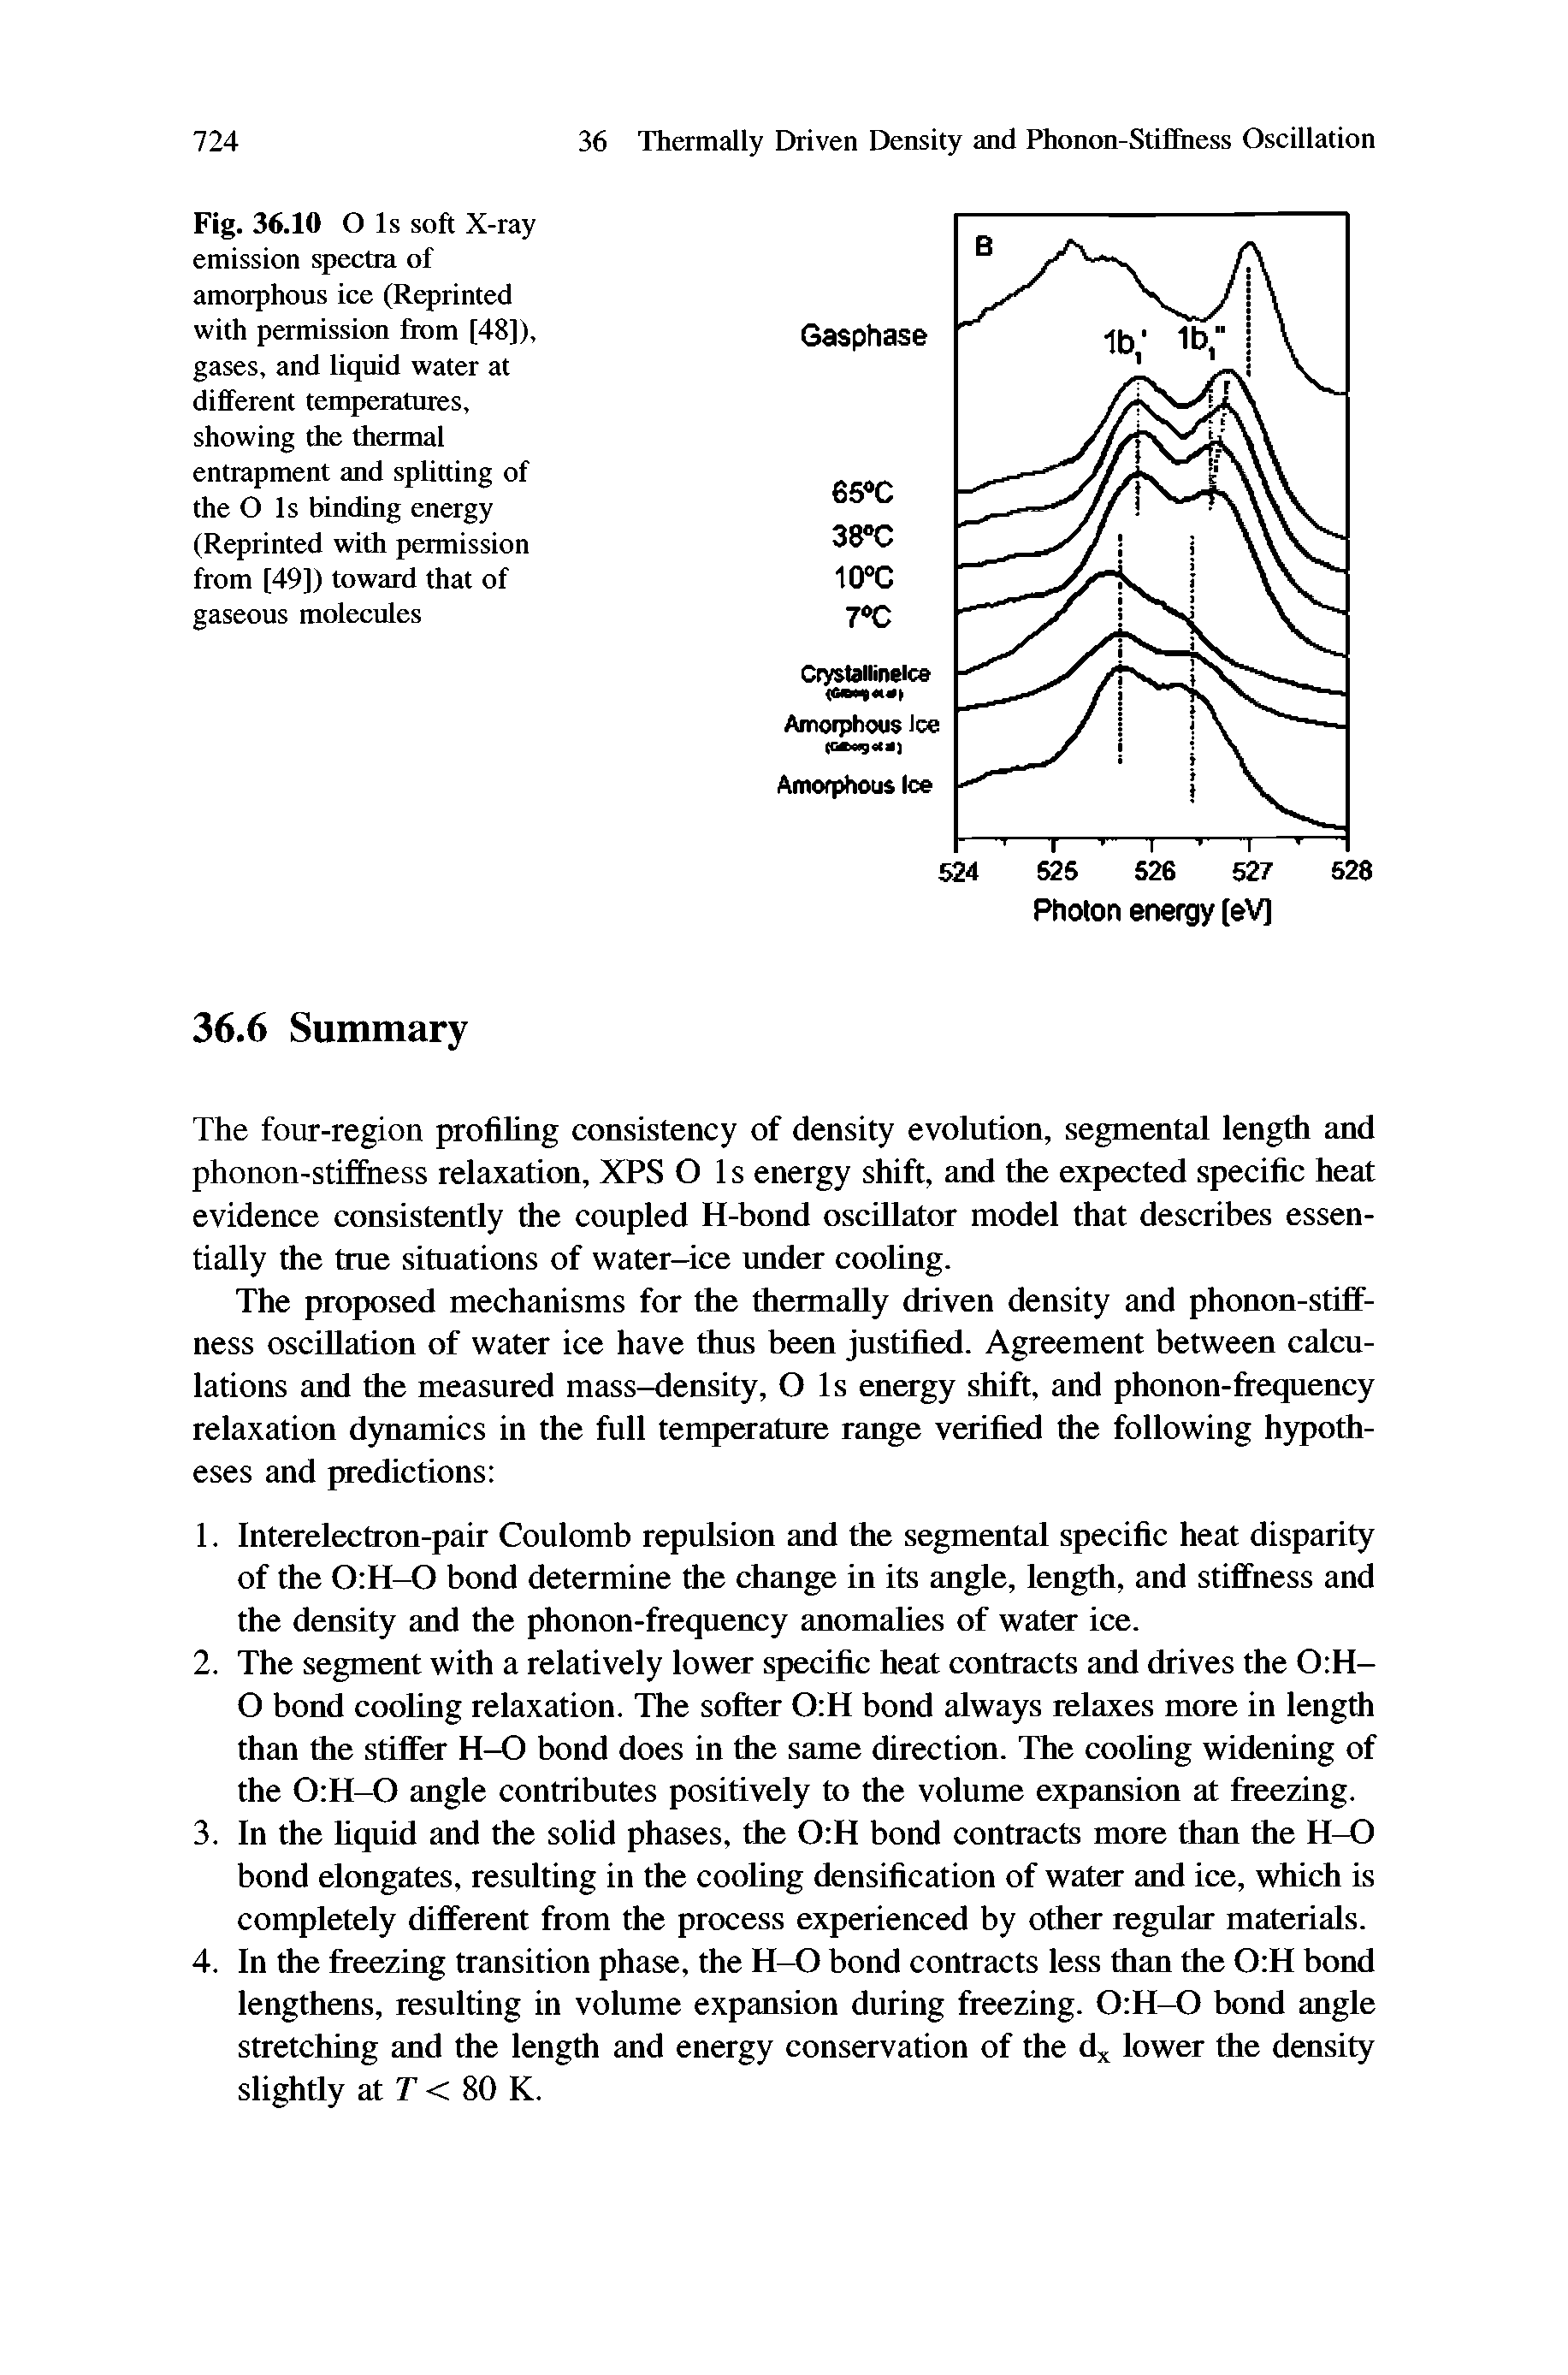 Fig. 36.10 O Is soft X-ray emission spectra of amorphous ice (Reprinted with permission from [48]), gases, and liquid water at different temperatures, showing the thermal entrapment and splitting of the O Is binding energy (Reprinted with permission from [49]) toward that of gaseous molecules...